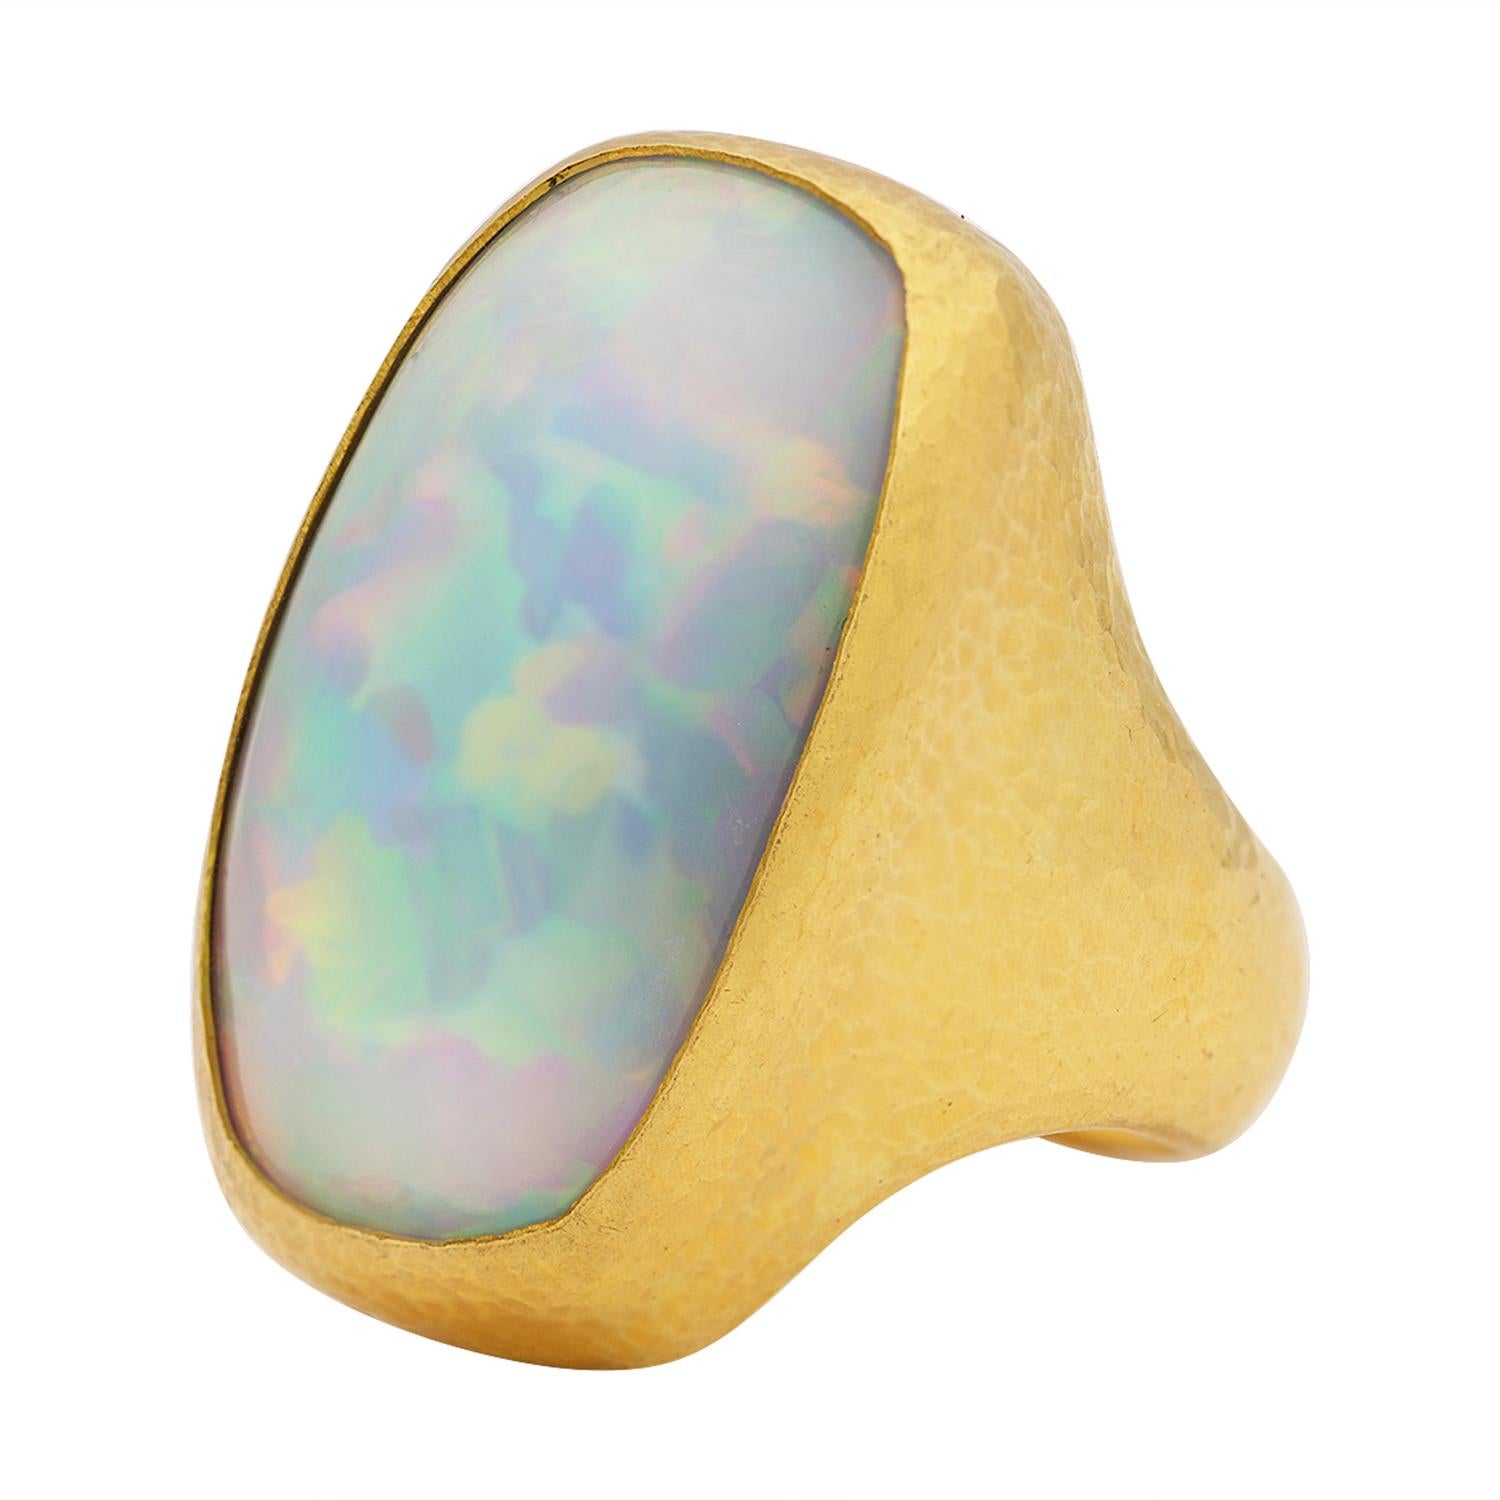 The one-of-a-kind Center Stone ring by Gurhan is a magnificent showcase of craftsmanship and rare beauty. This stunning piece features a large, 30x17mm rectangular cabochon Ethiopian Opal weighing 35.56 carats, set in a 24k gold bezel. The opal,